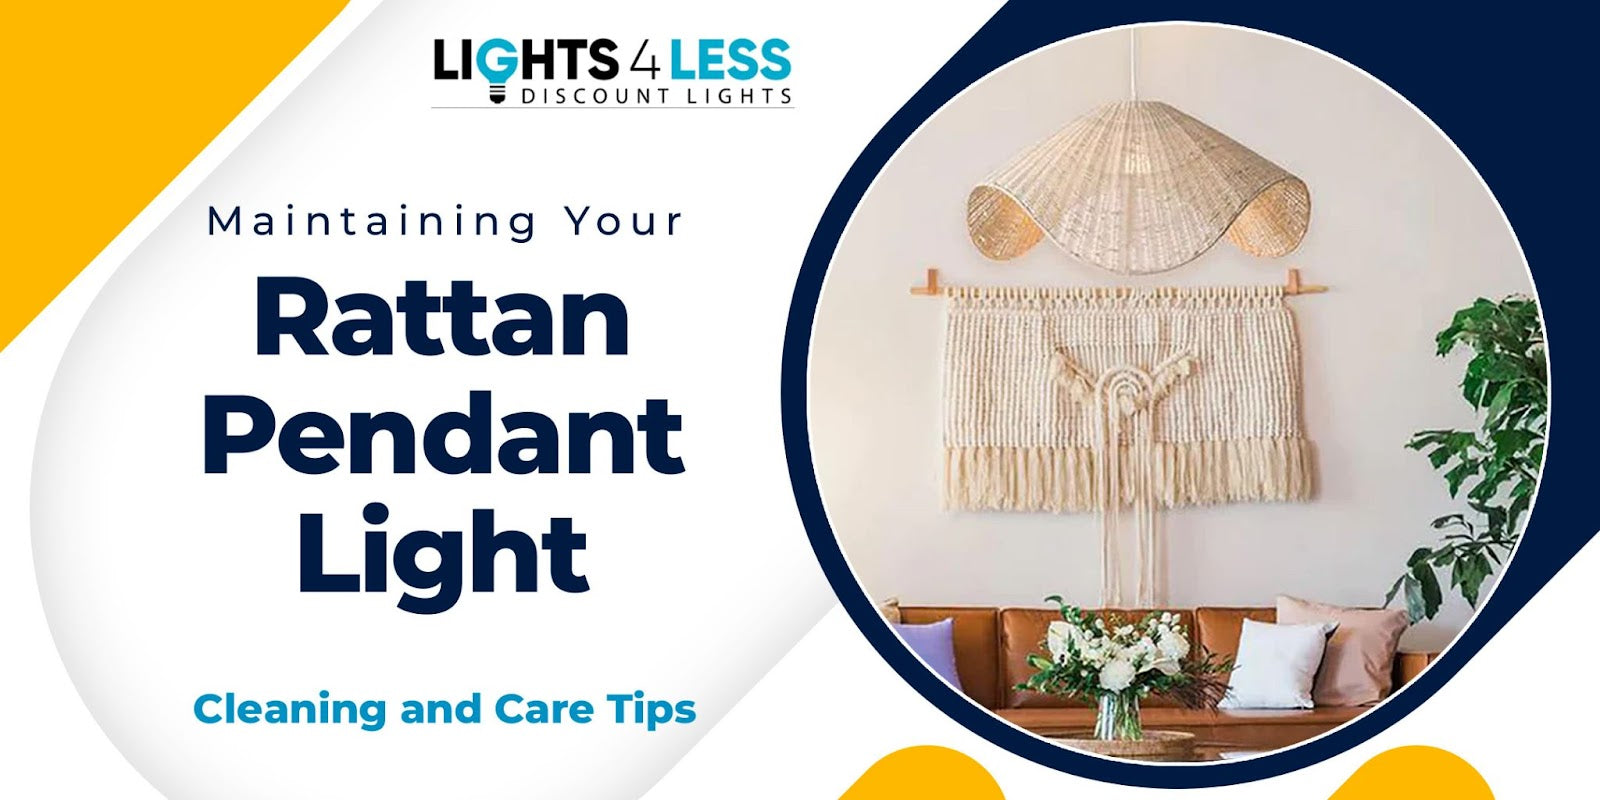 How to Clean and Care for Your Rattan Pendant Light